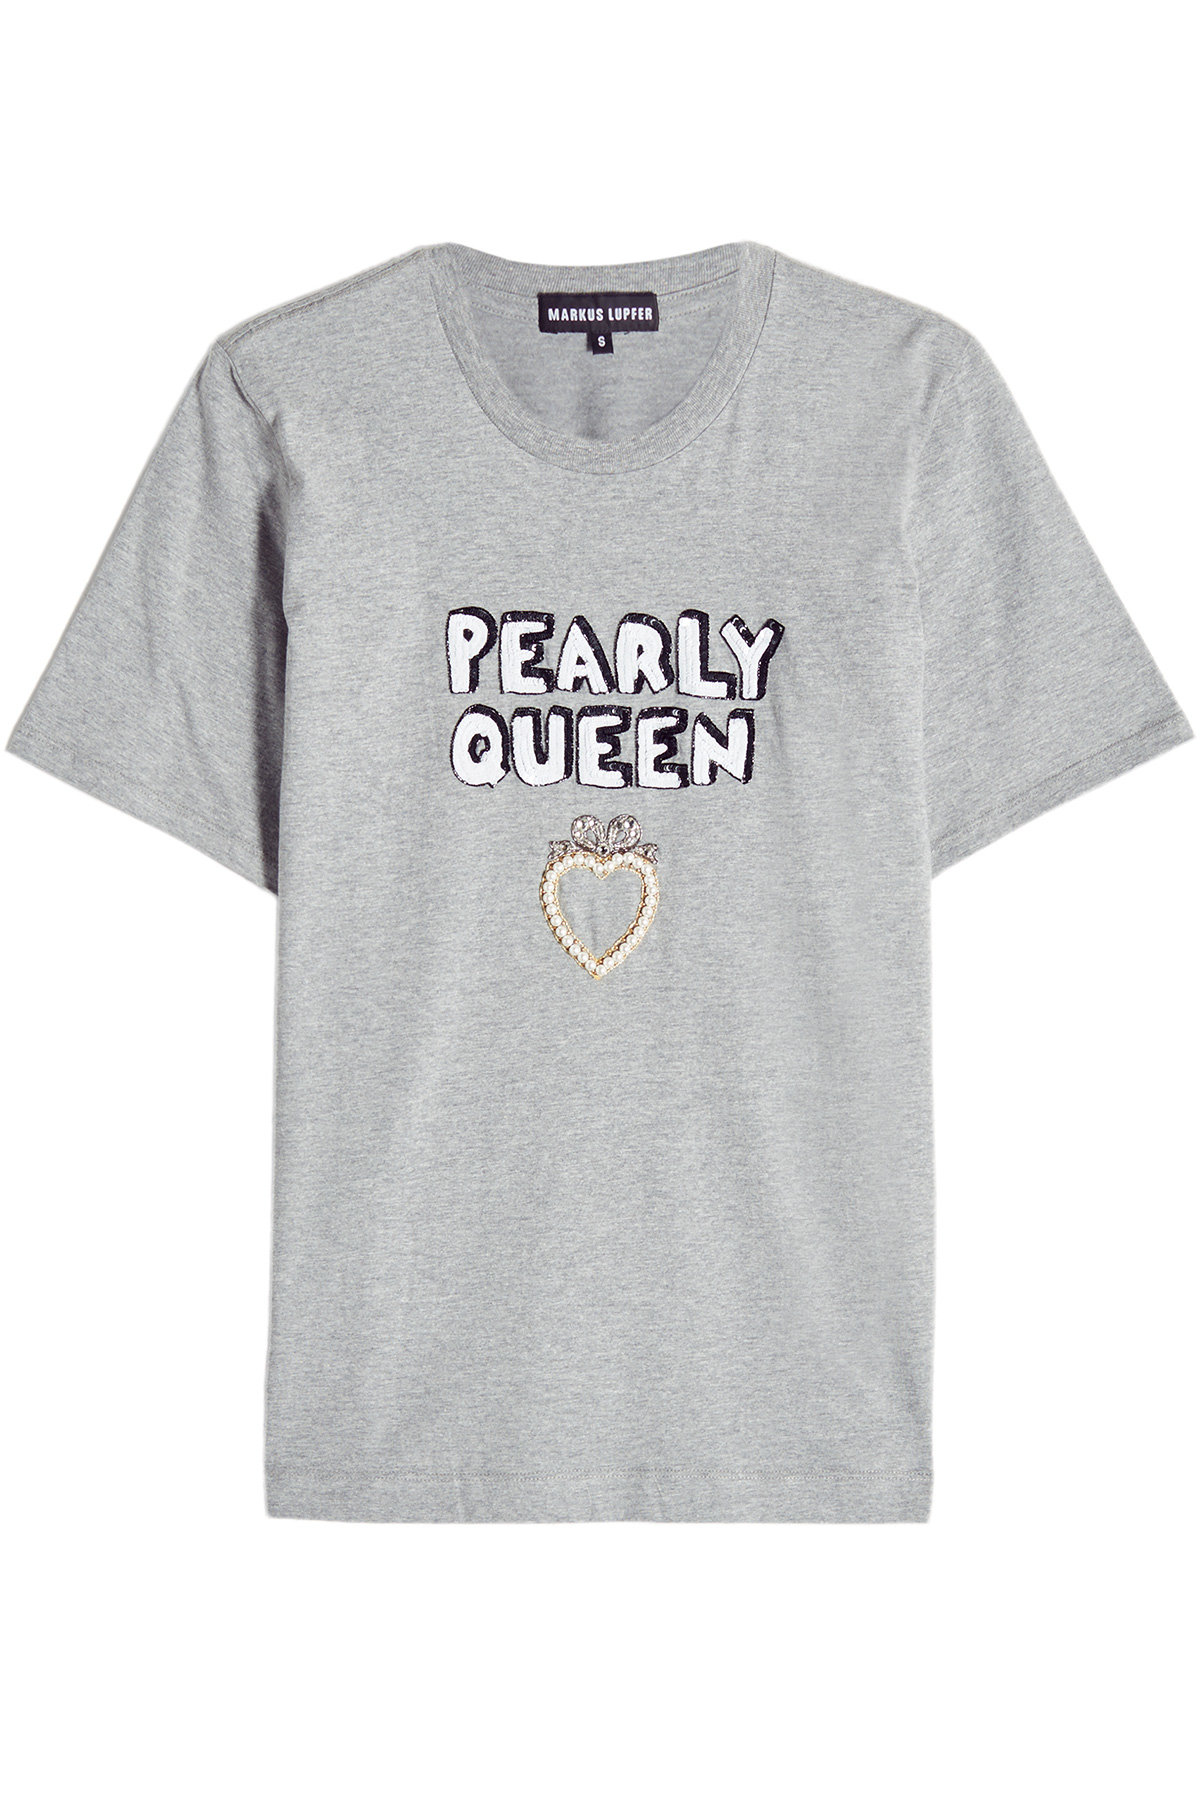 Markus Lupfer - Pearly Queen Embellished Cotton T-Shirt